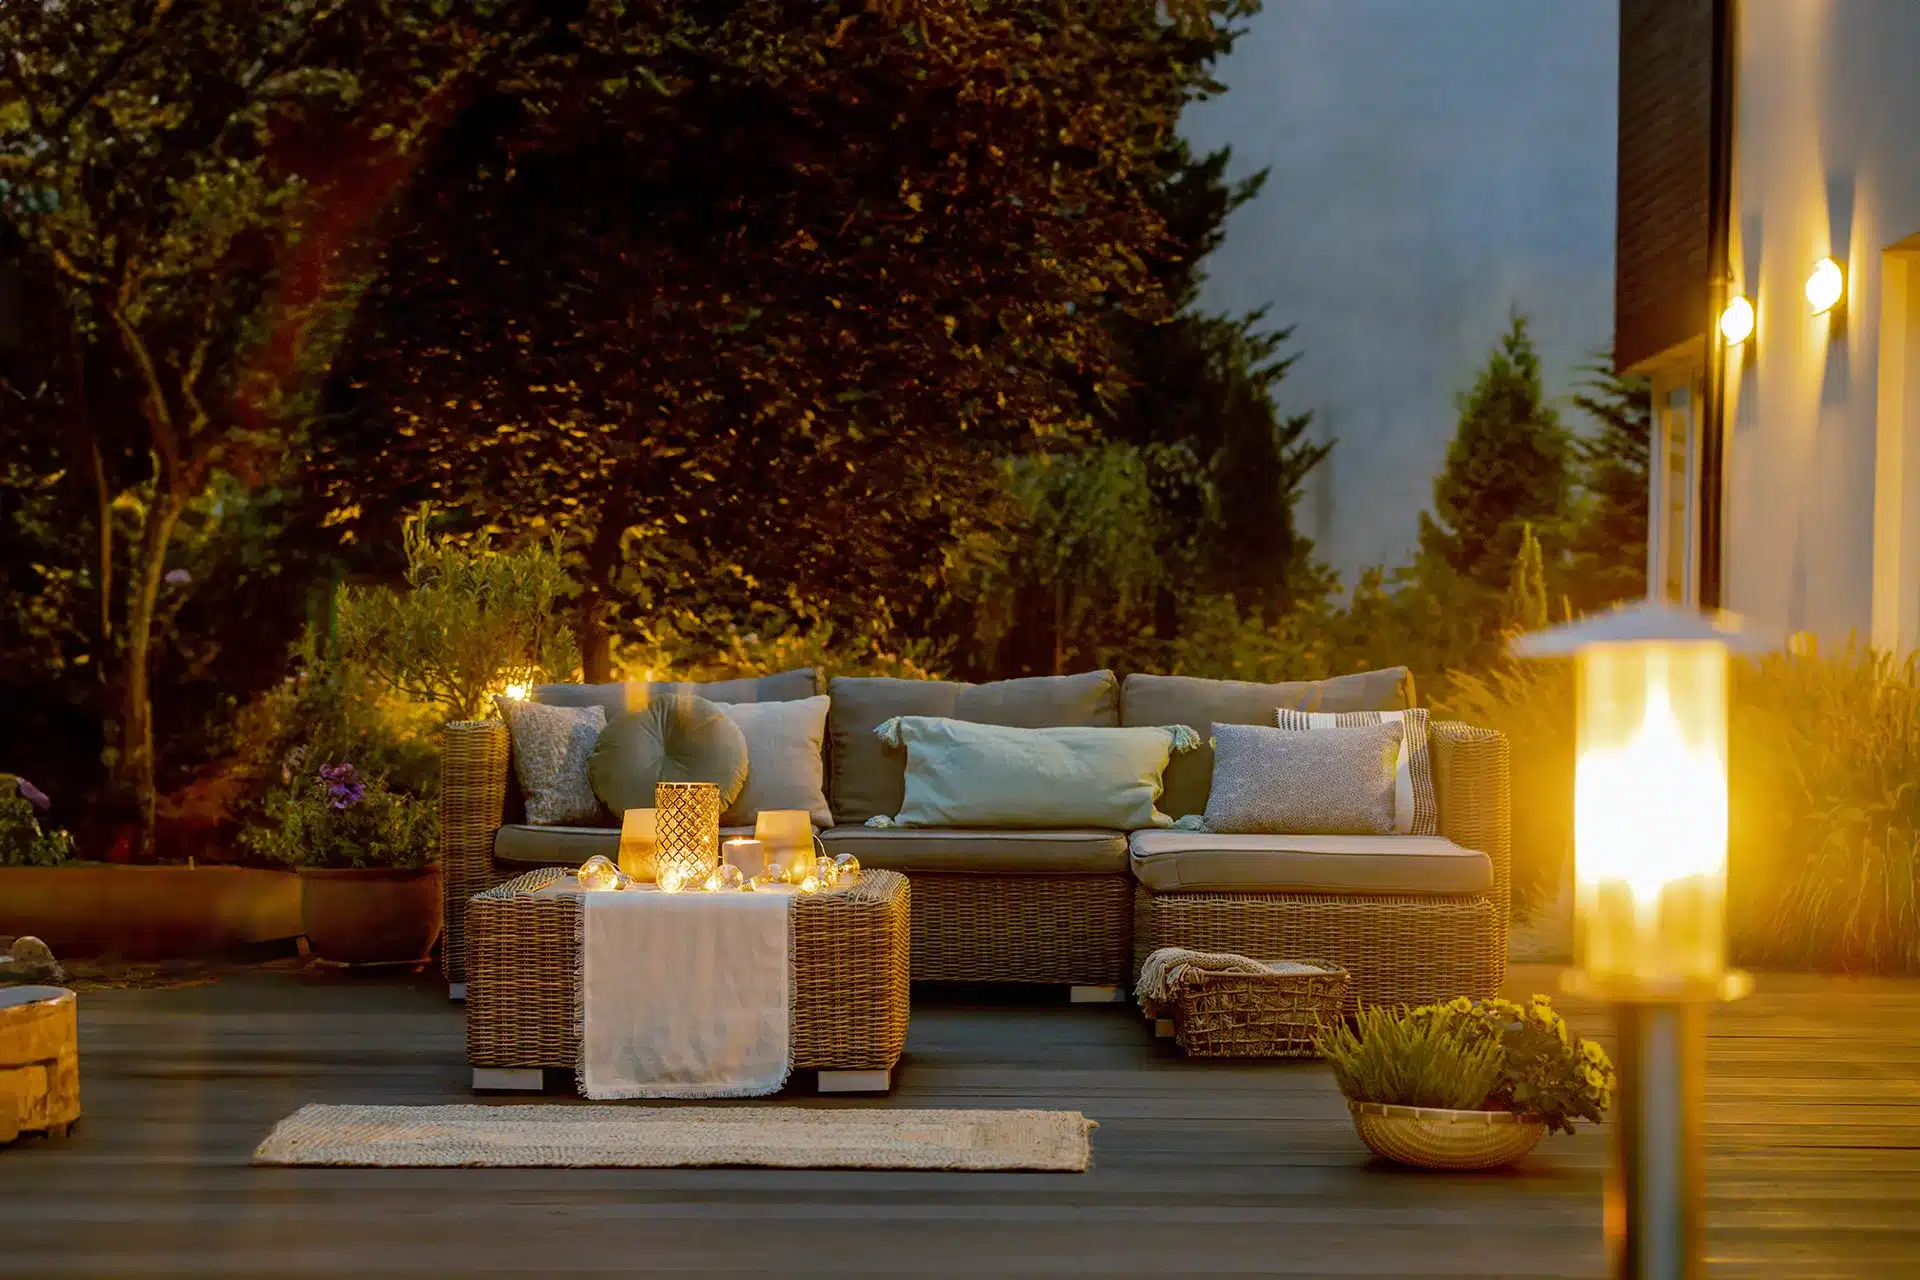 An outdoor living space with seating and lighting at dusk.